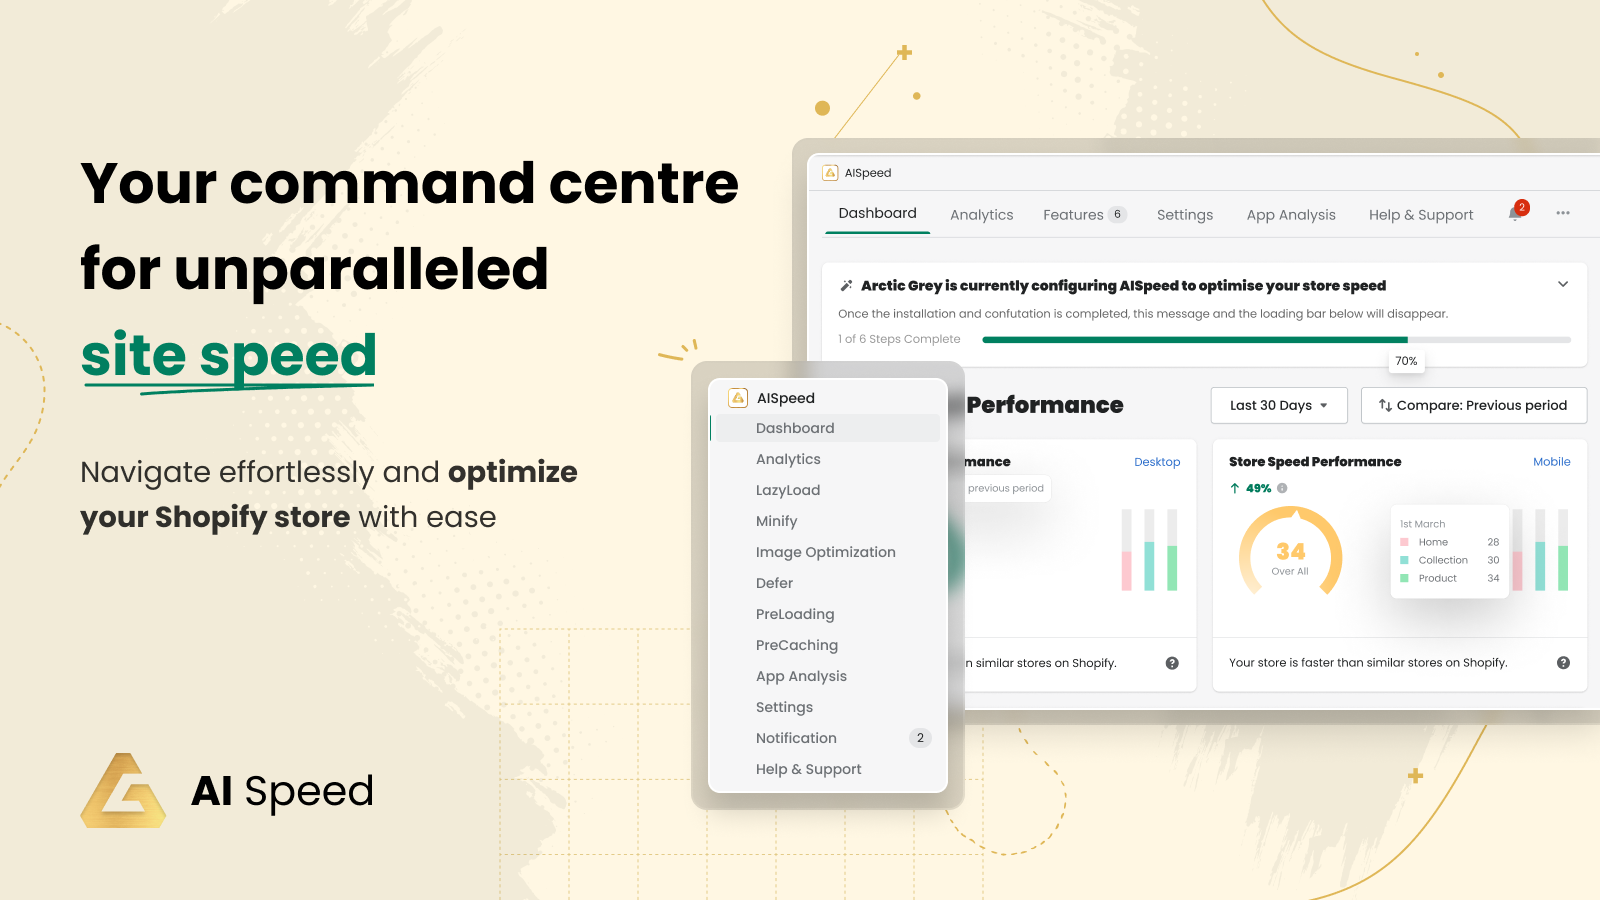 Your command centre for unparalleled site speed